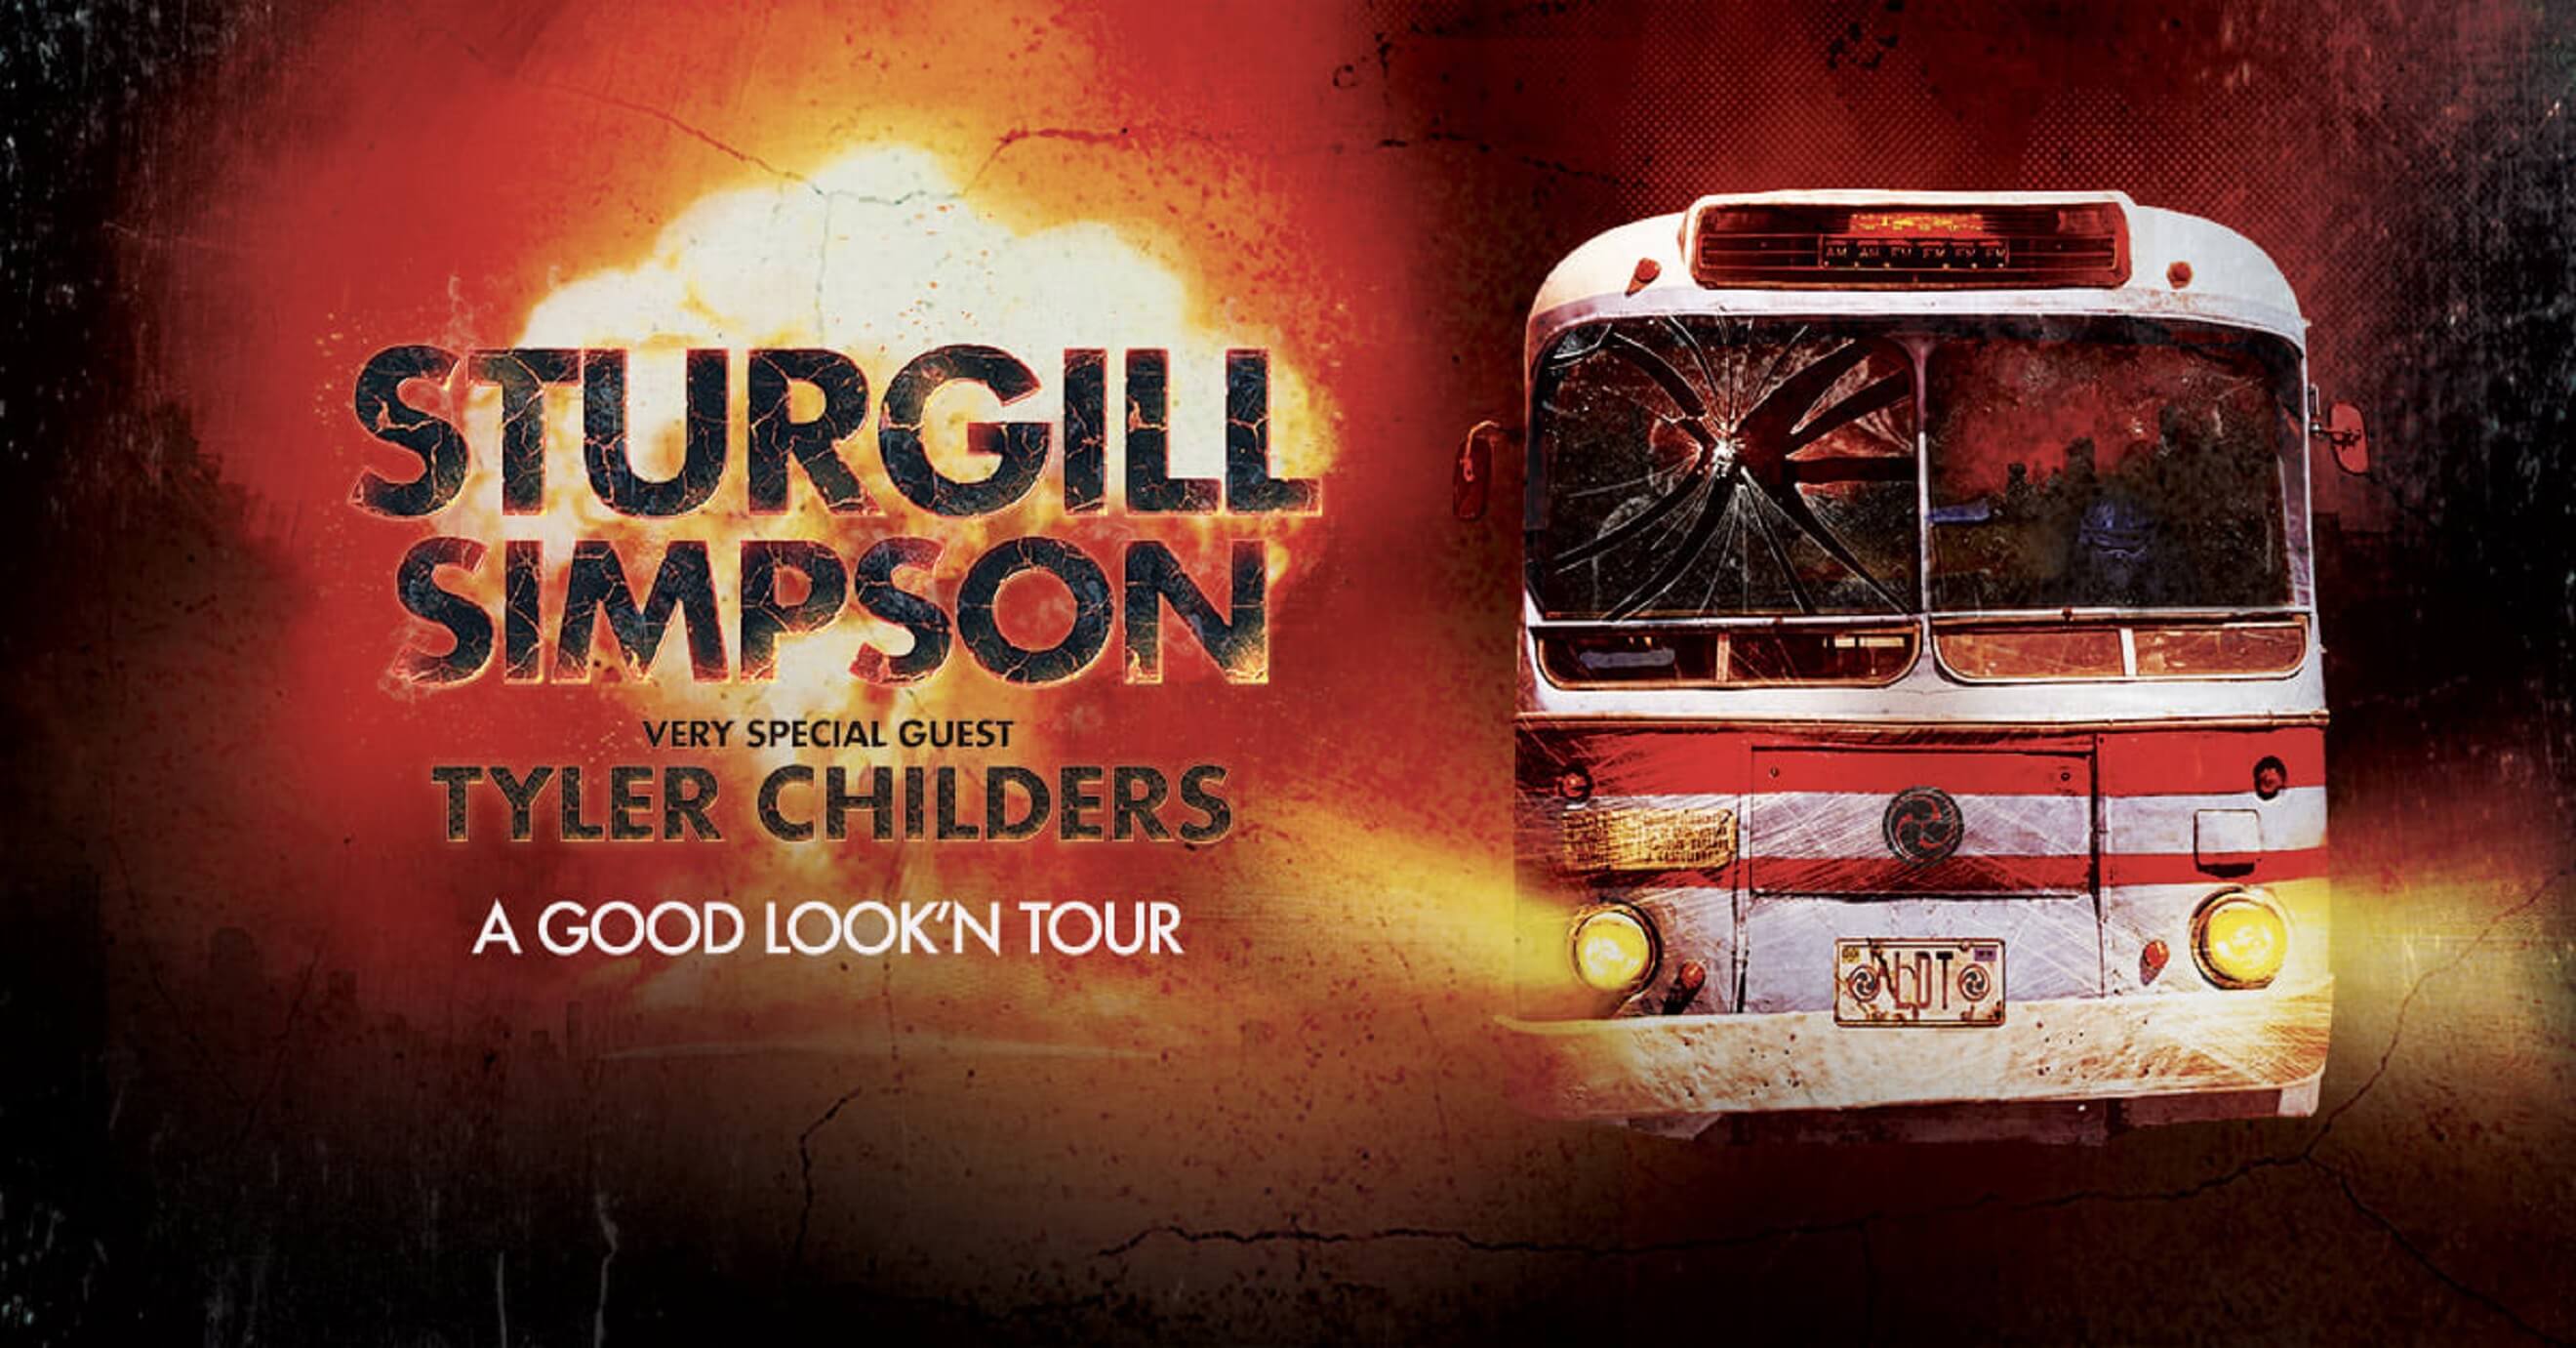 Sturgill Simpson & Tyler Childers Tour Announced - KY Supply Co